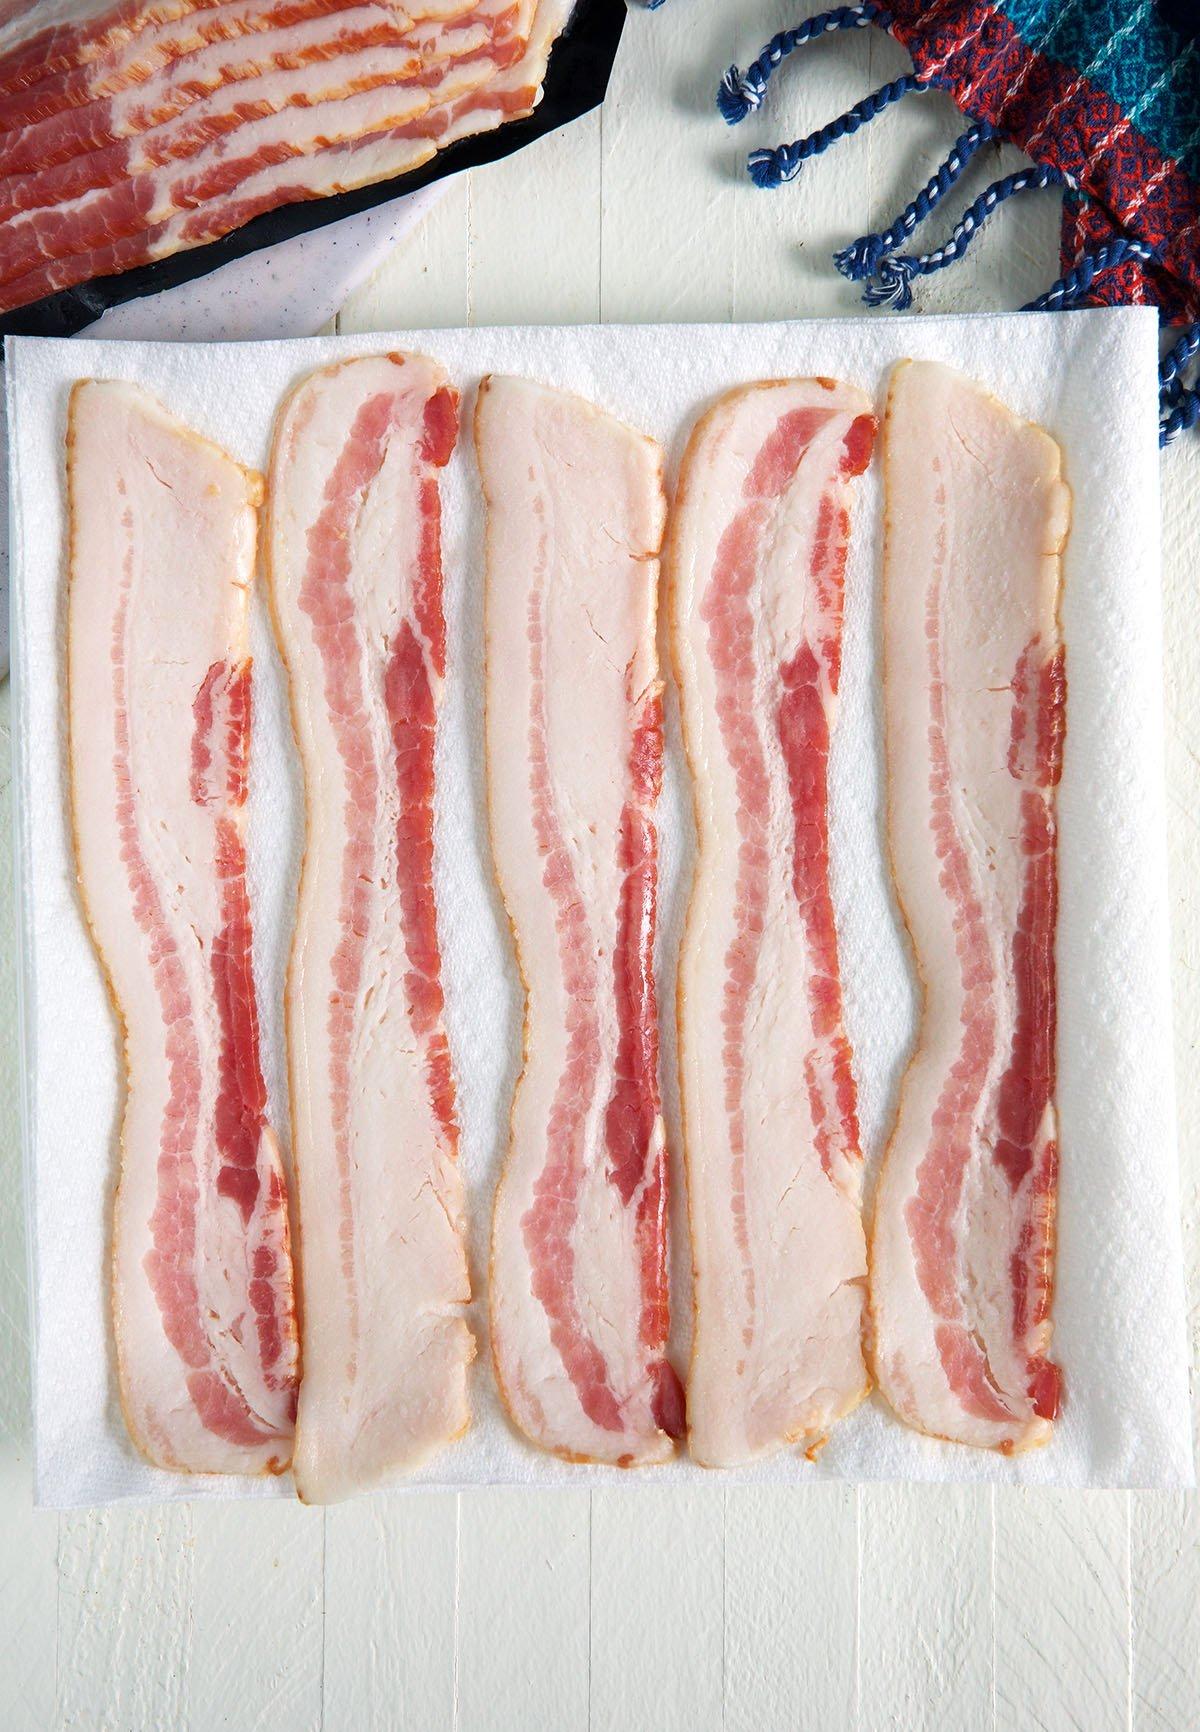 Raw bacon is placed on a sheet of paper towels.